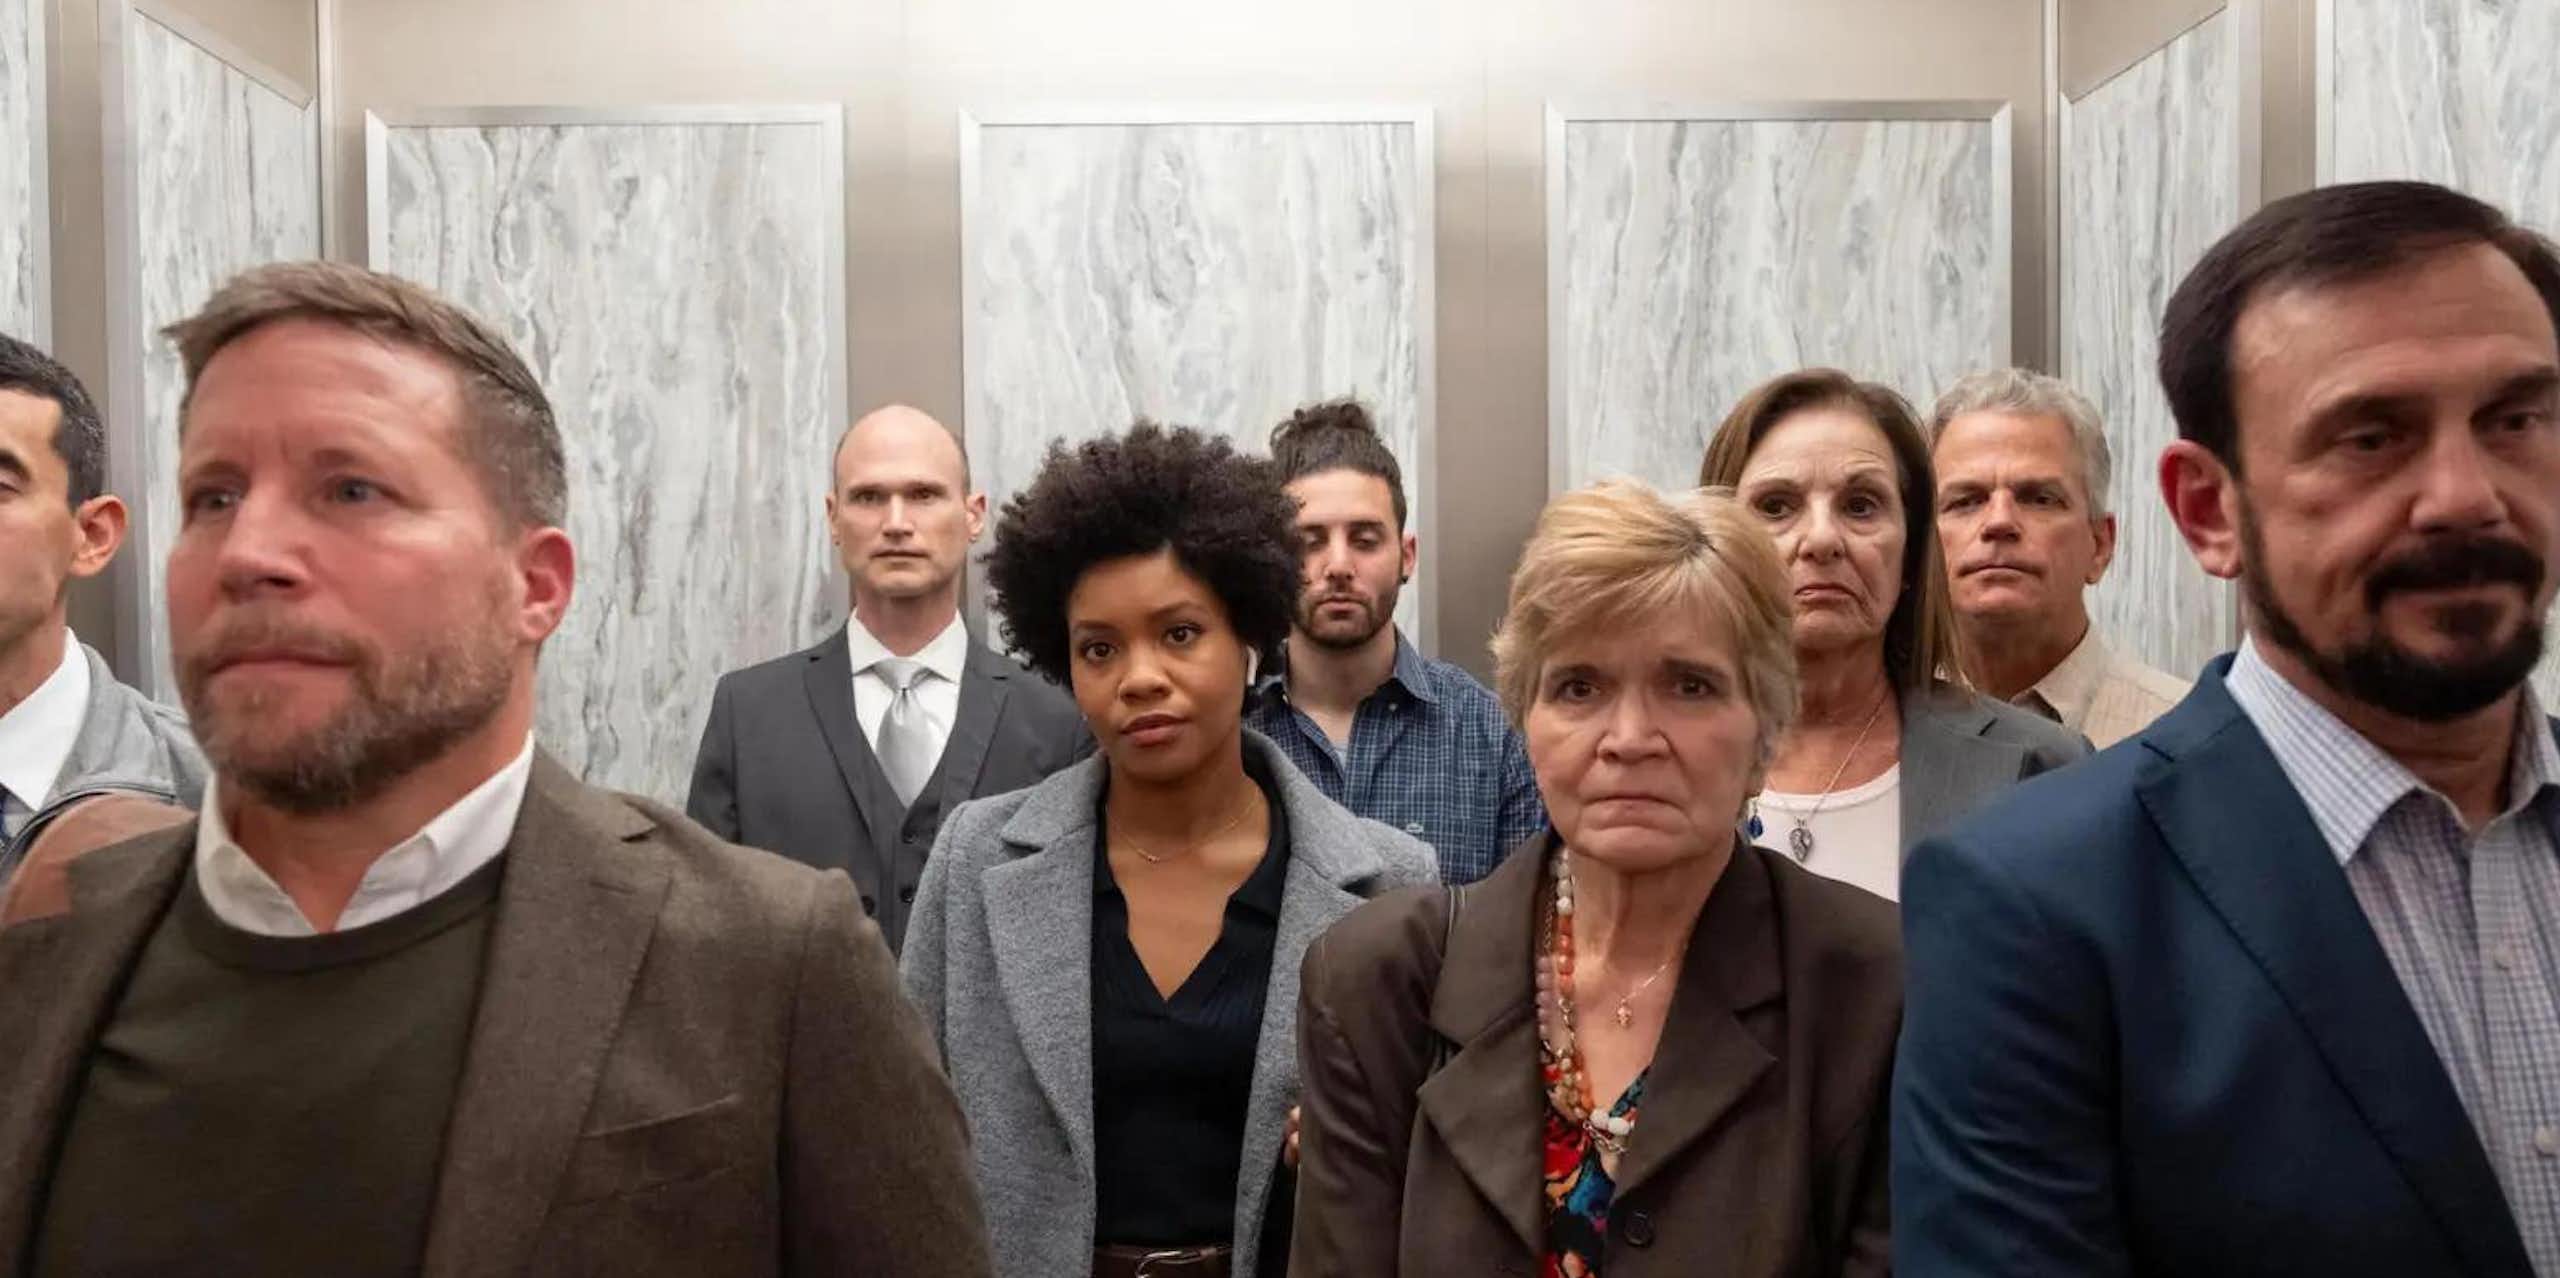 A Black woman stands in an elevator at work surrounded by white coworkers.